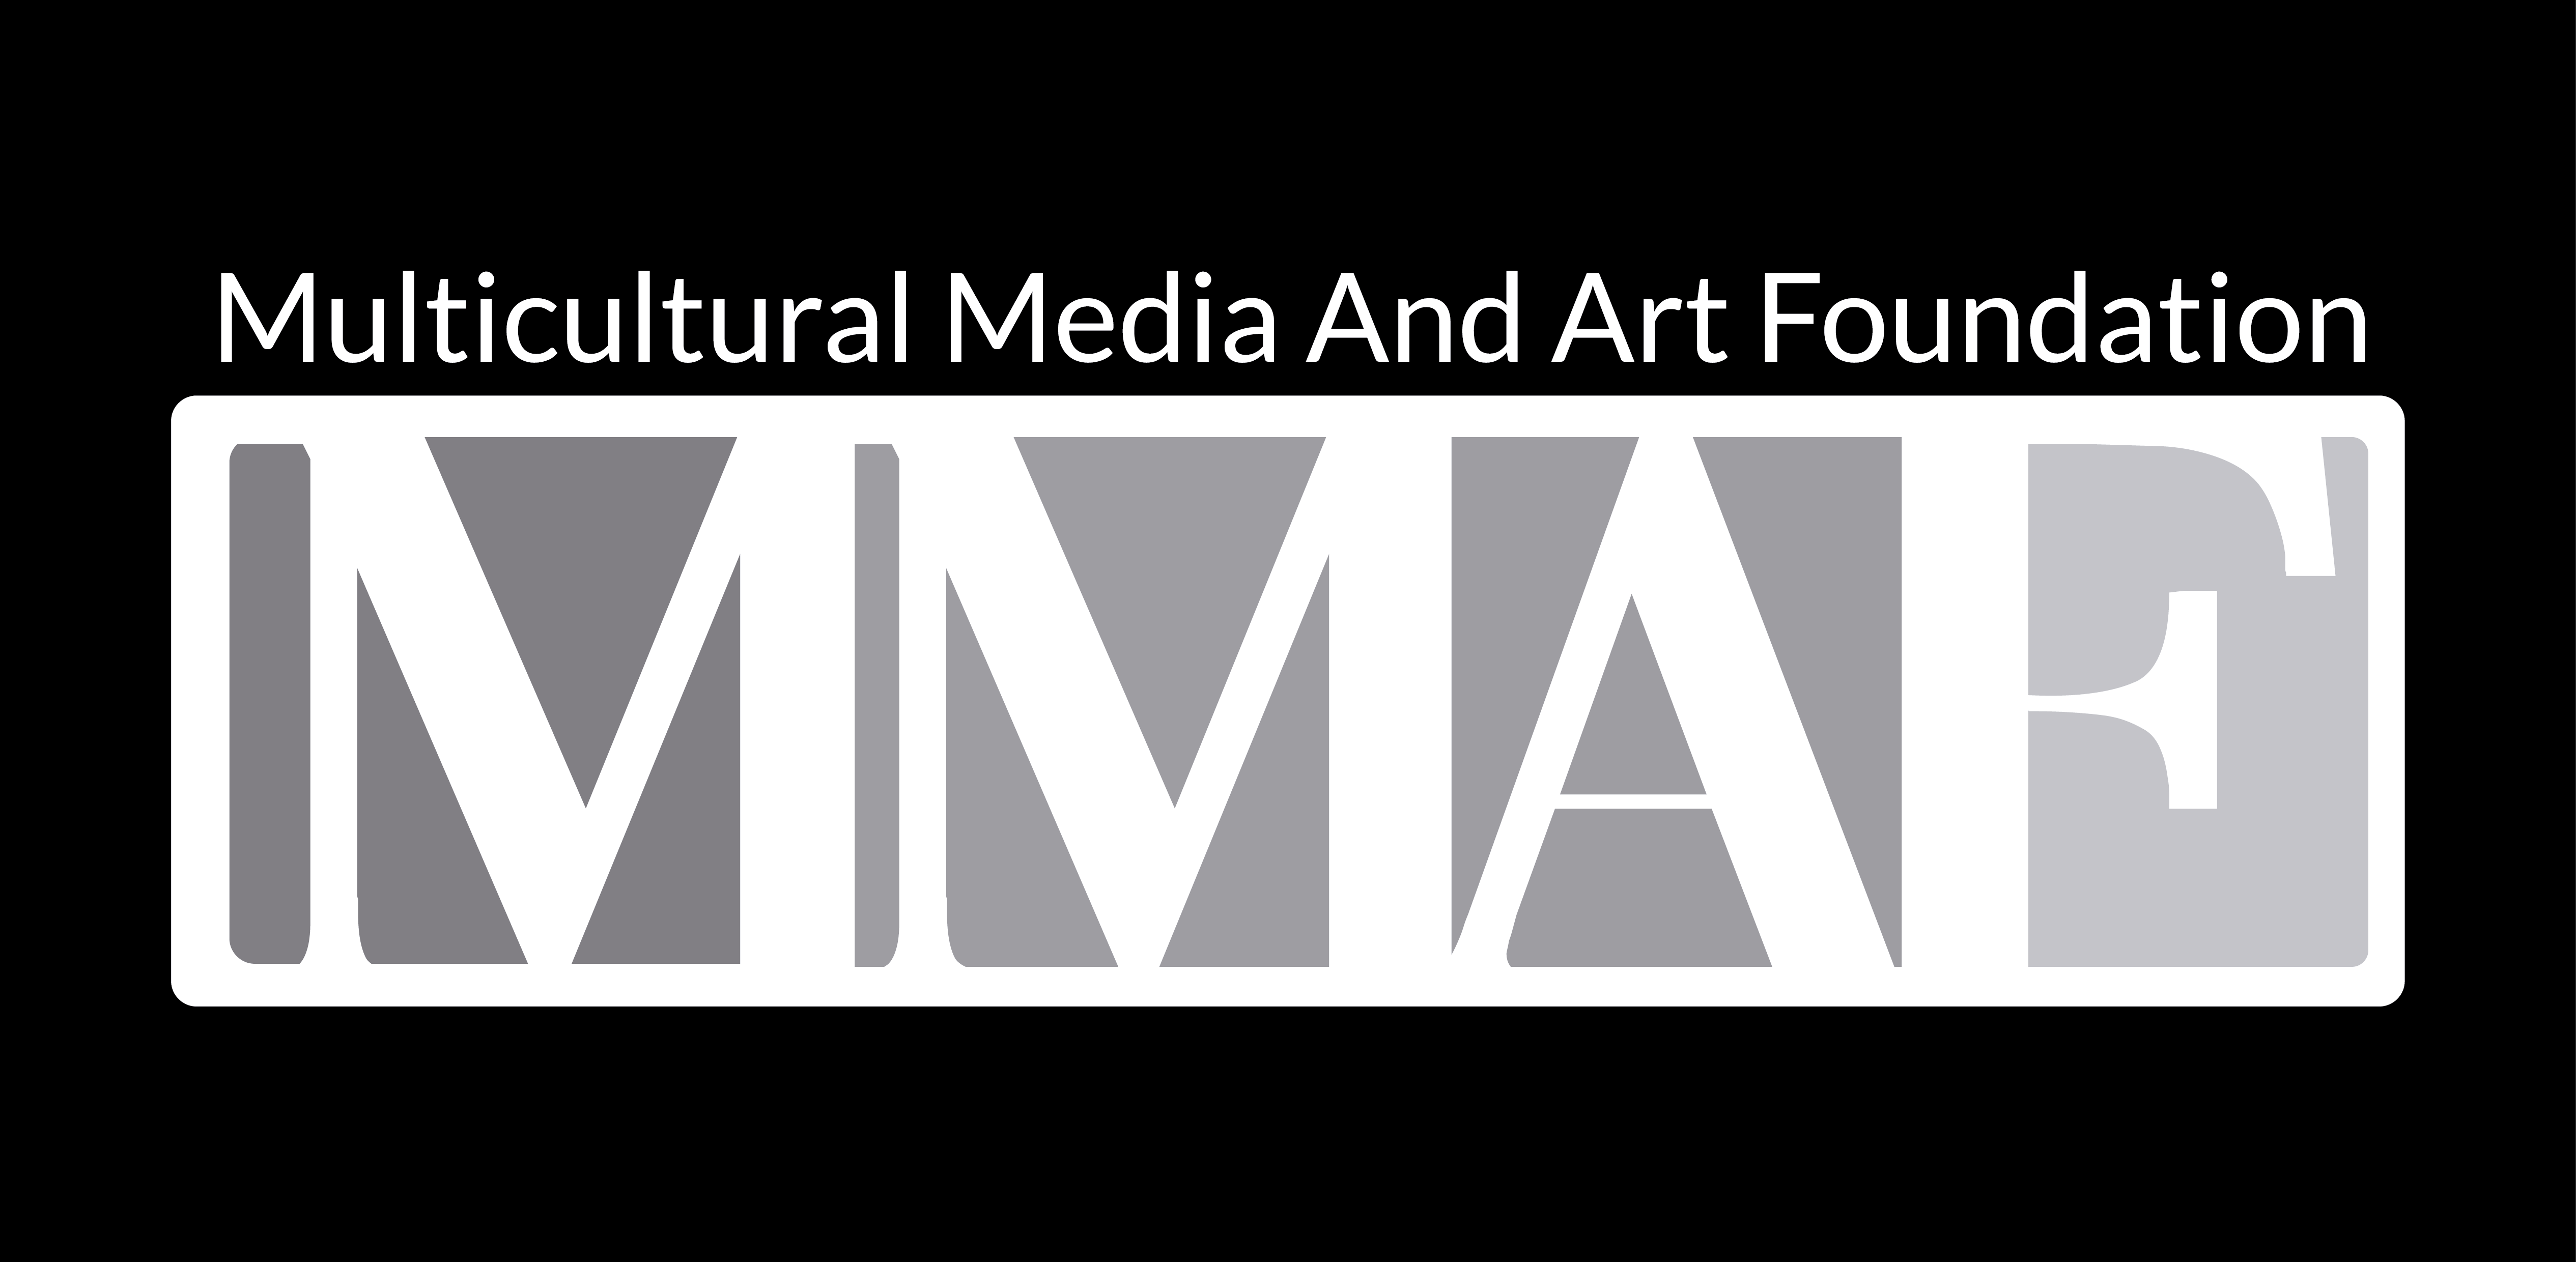 Multicultural Media and Art Foundation